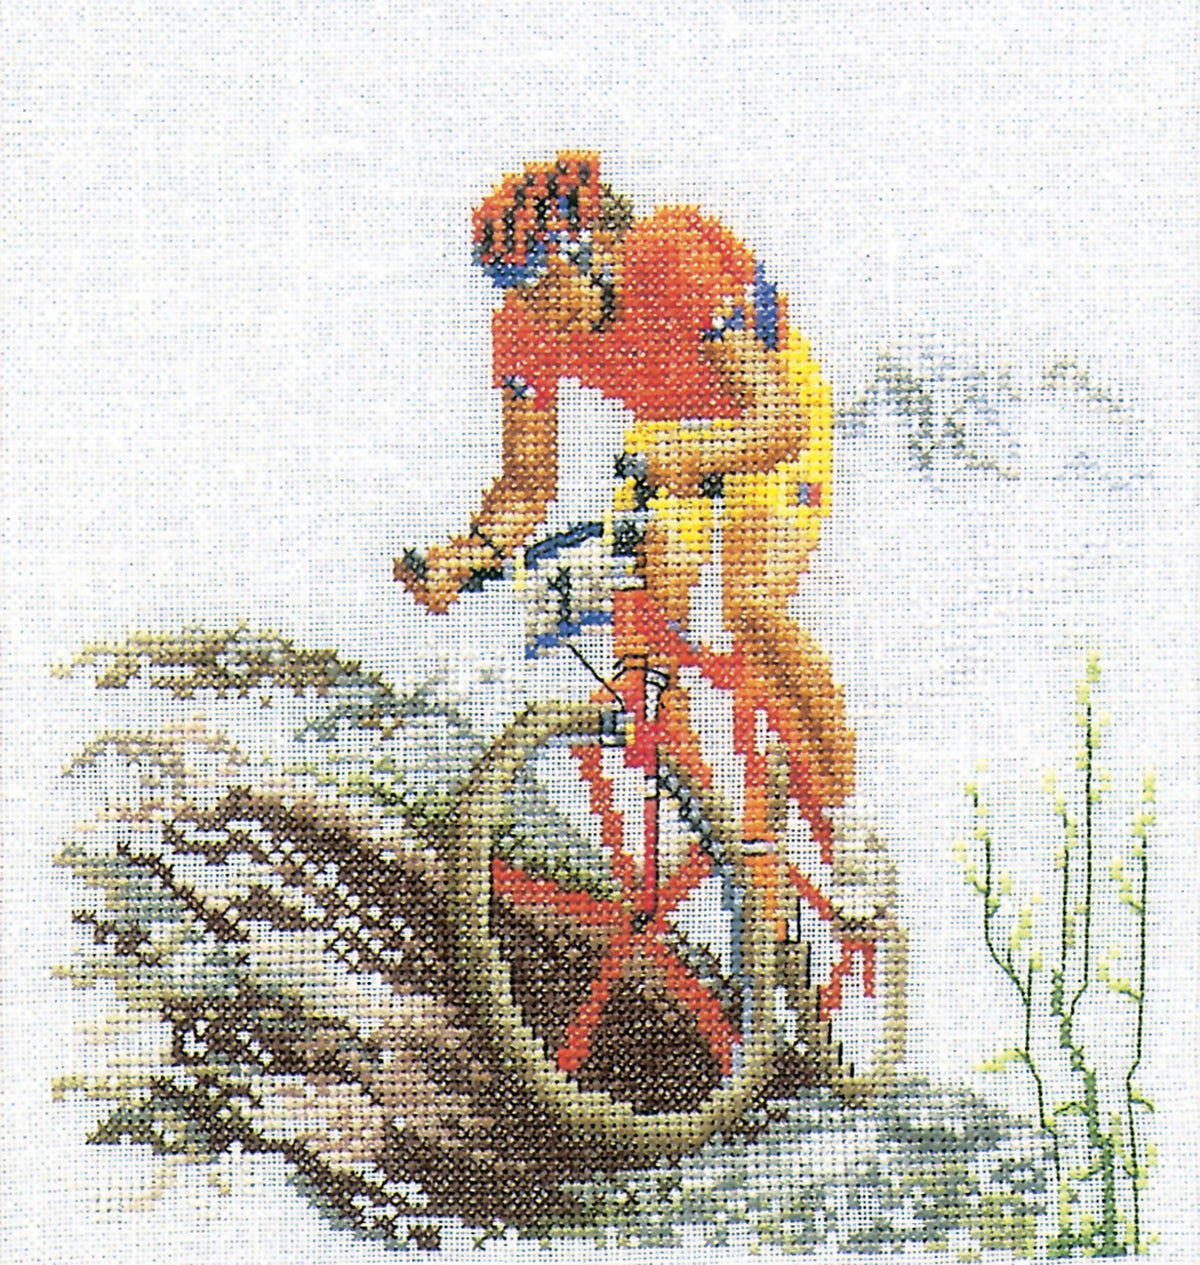 Thea Gouverneur - Counted Cross Stitch Kit - Mountainbike - Aida - 18 count - 3035A - Thea Gouverneur Since 1959